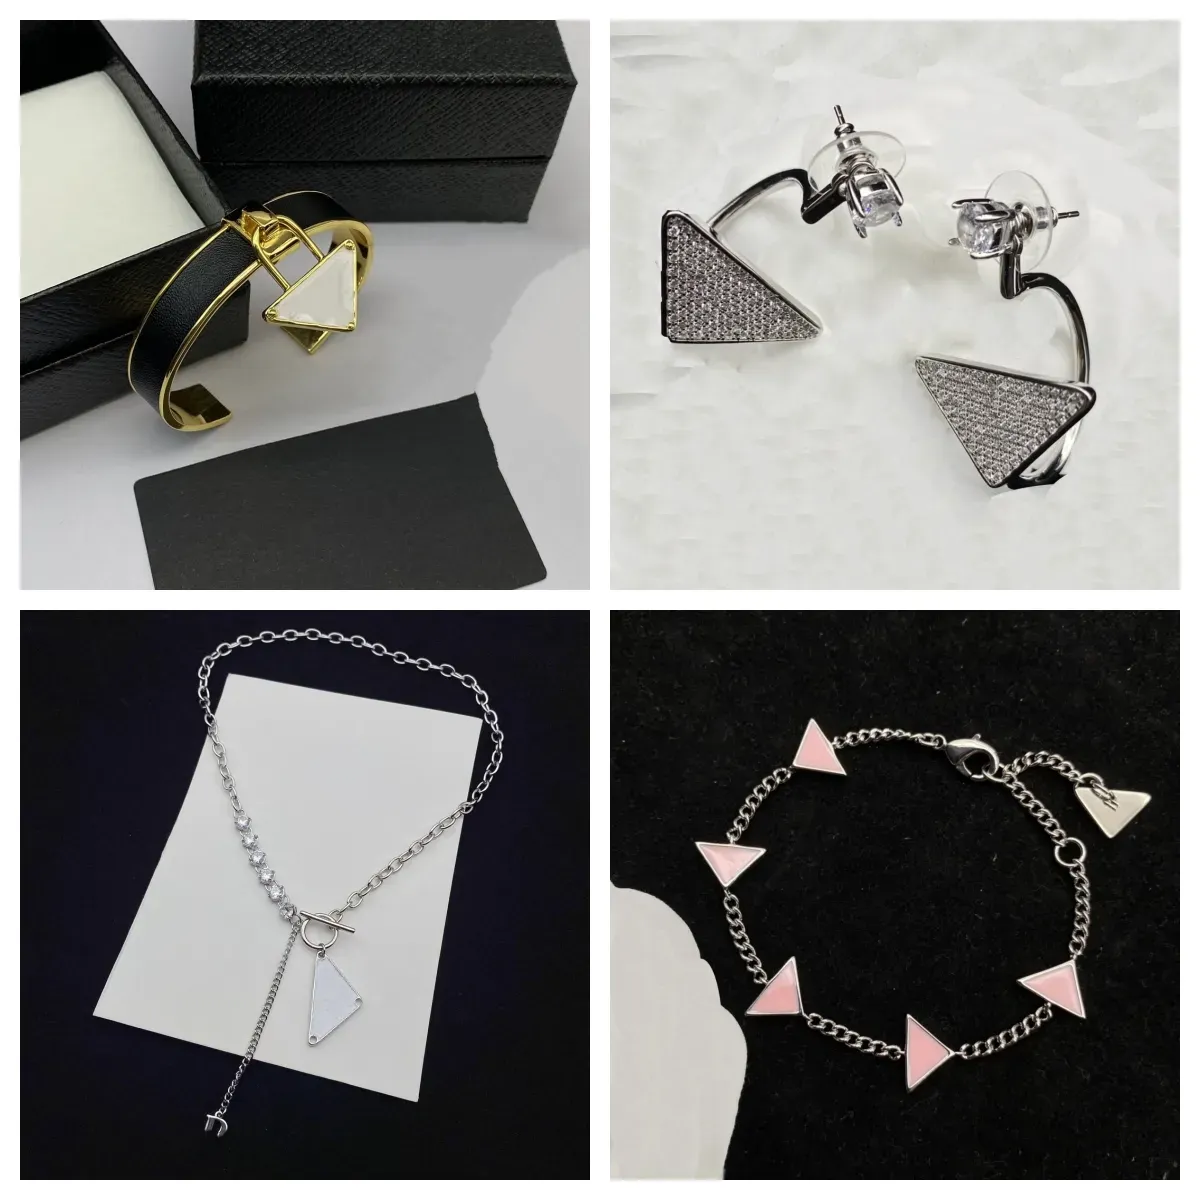 2024 New Fashion Top Look Hot-selling Brand Designer Pendant Necklaces Earrings Bracelet Jewelry Gifts for Women Anniversary Birthday Wife Mom Girlfriend